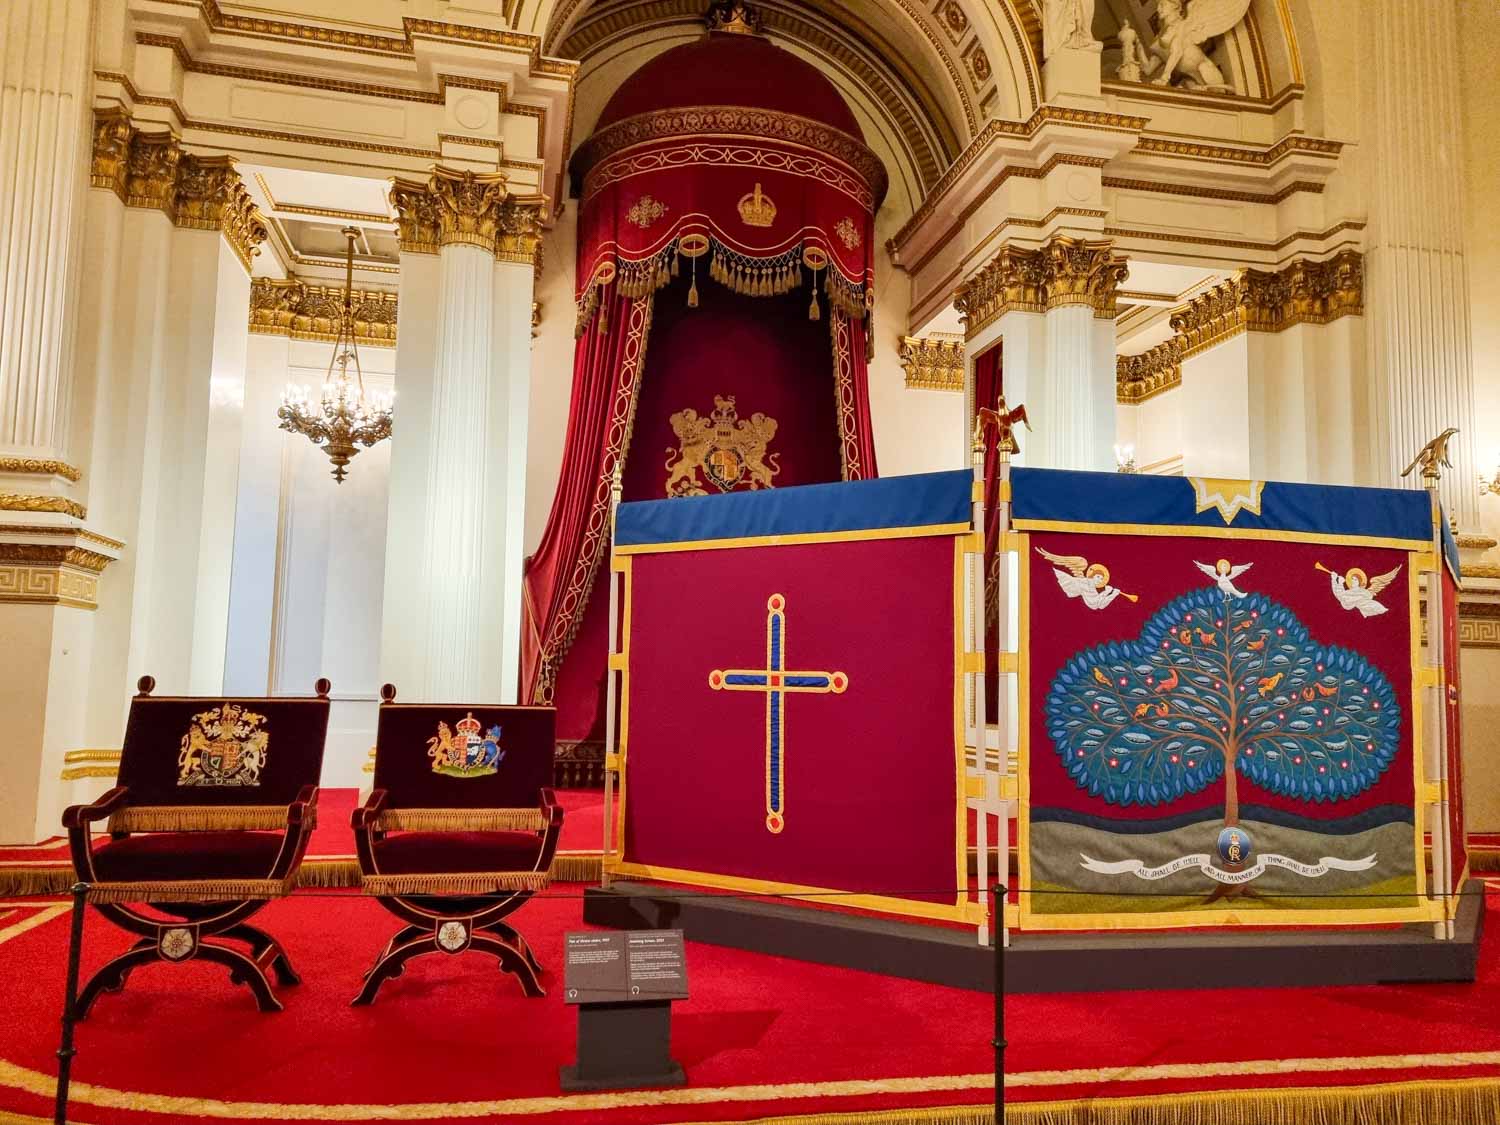 View of the Anointing Screen and throne chairs used during the Coronation ceremony of King Charles III, on display as part of a special Coronation exhibition at Buckingham Palace - one of the reasons to visit Buckingham Palace with kids in 2023